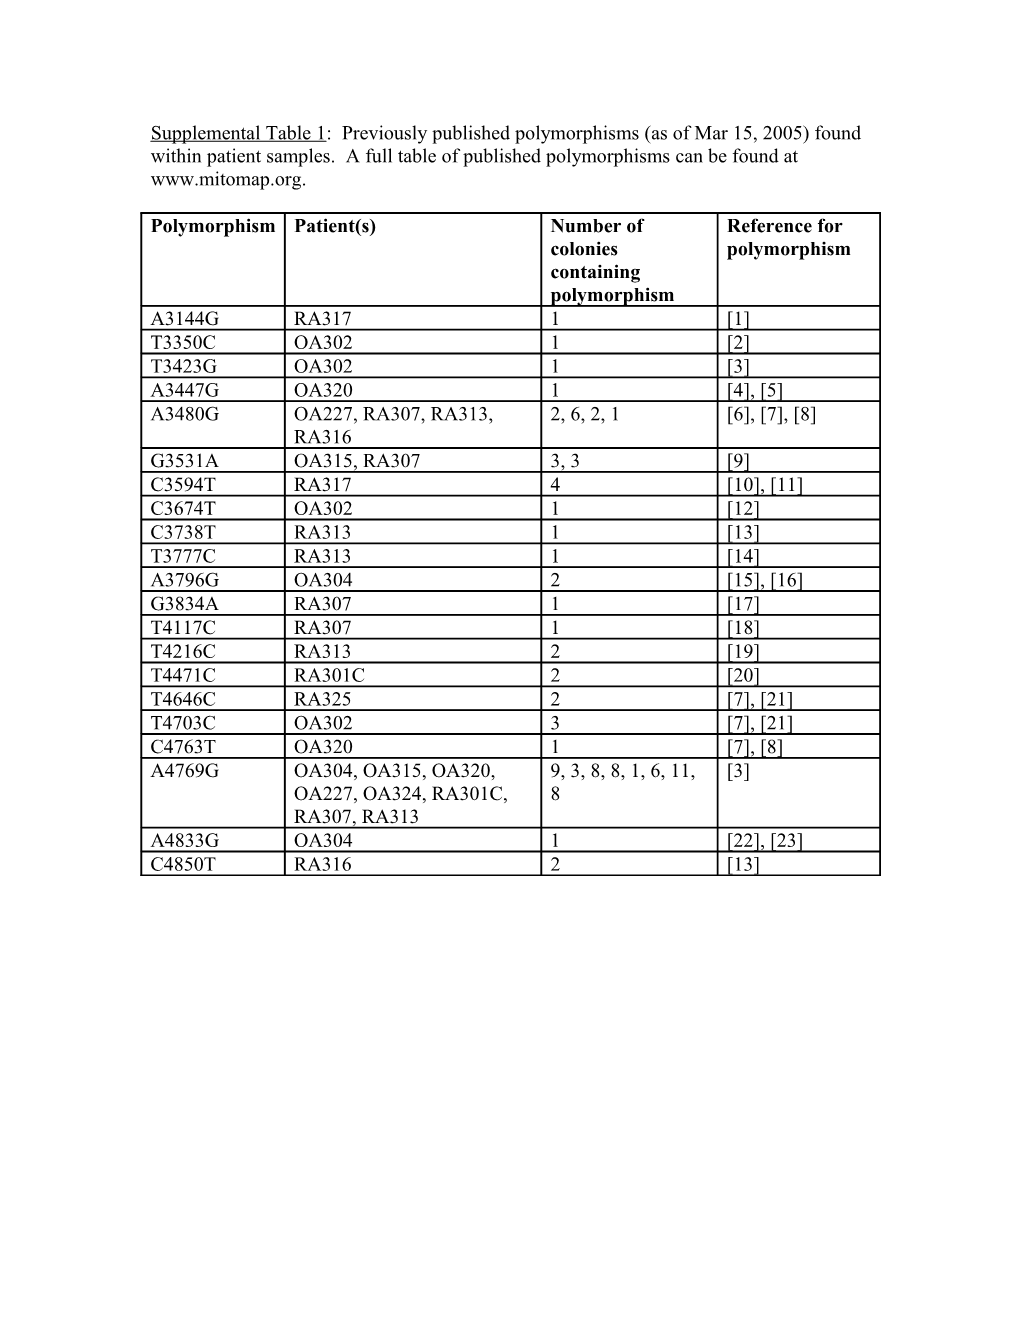 Supplemental Table 1: Previously Published Polymorphisms Found Within Patient Samples